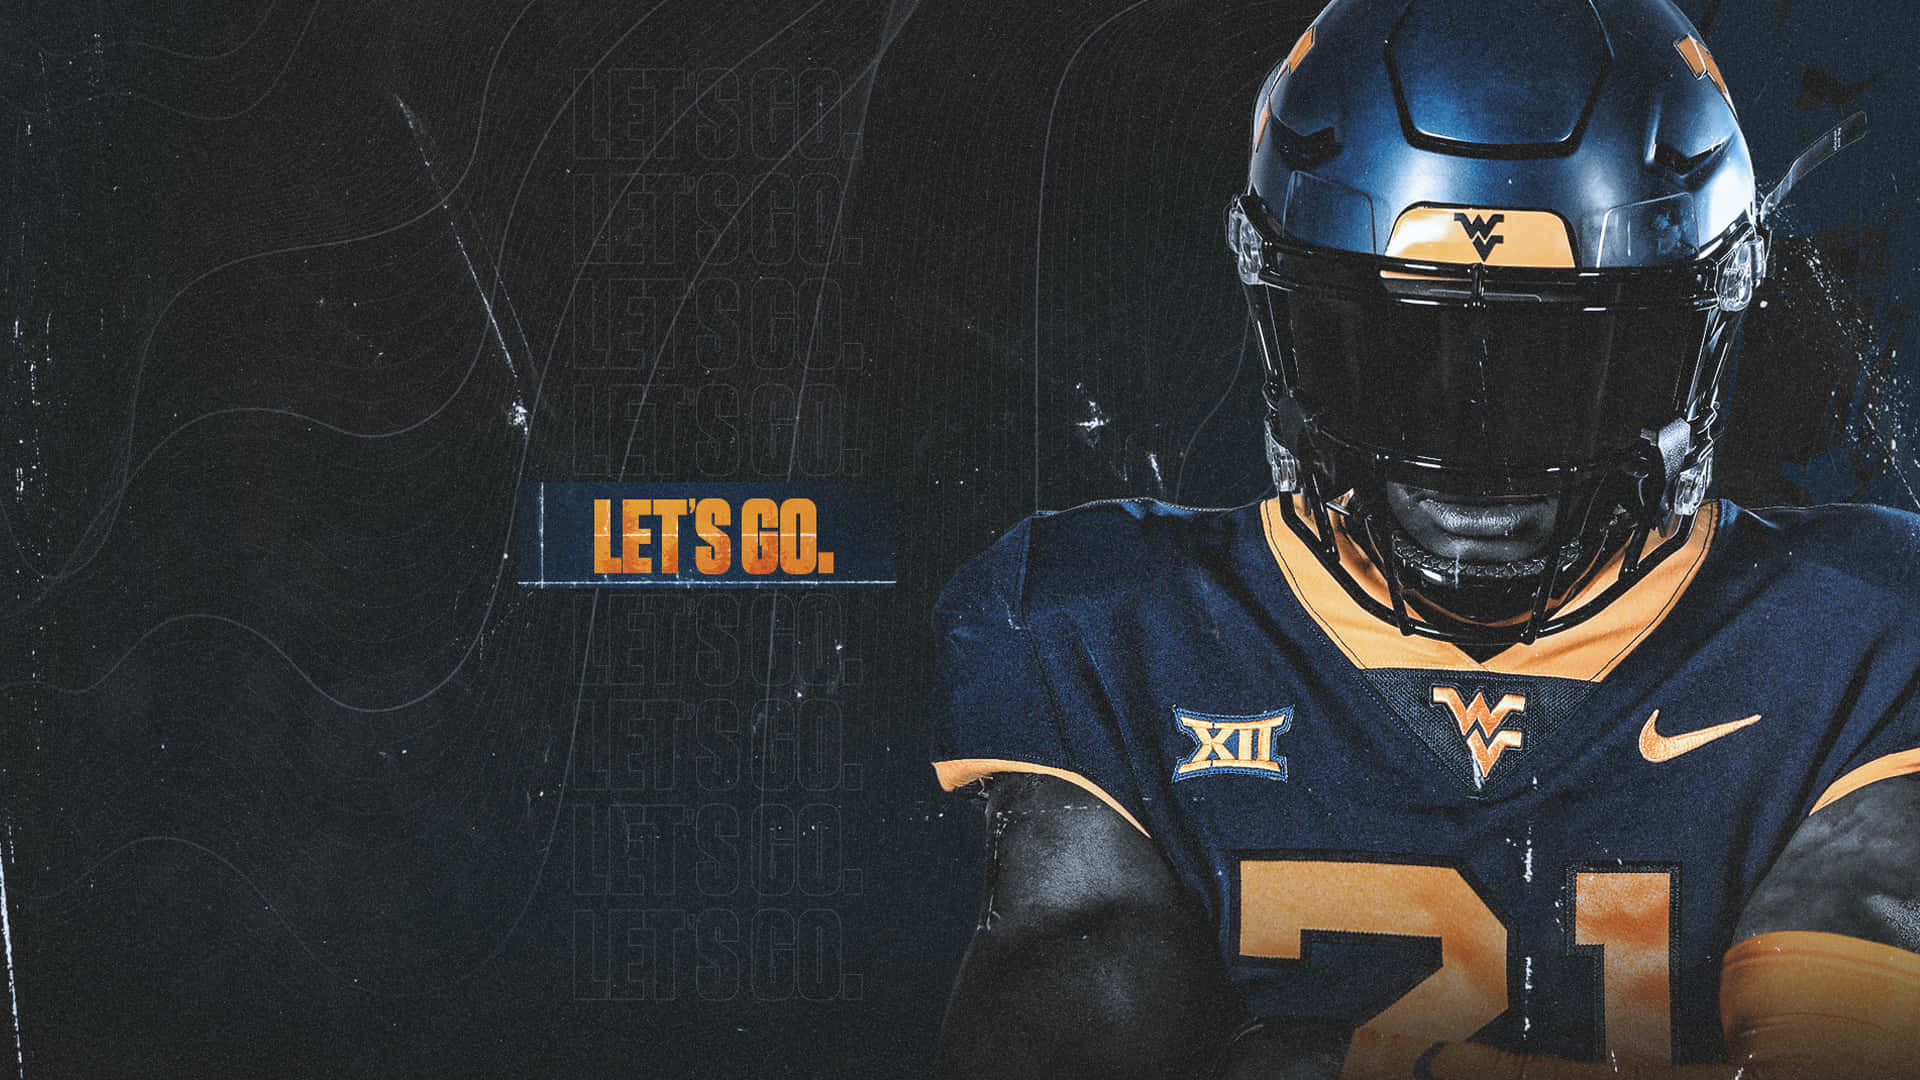 Get ready to cheer on the West Virginia Mountaineers! Wallpaper